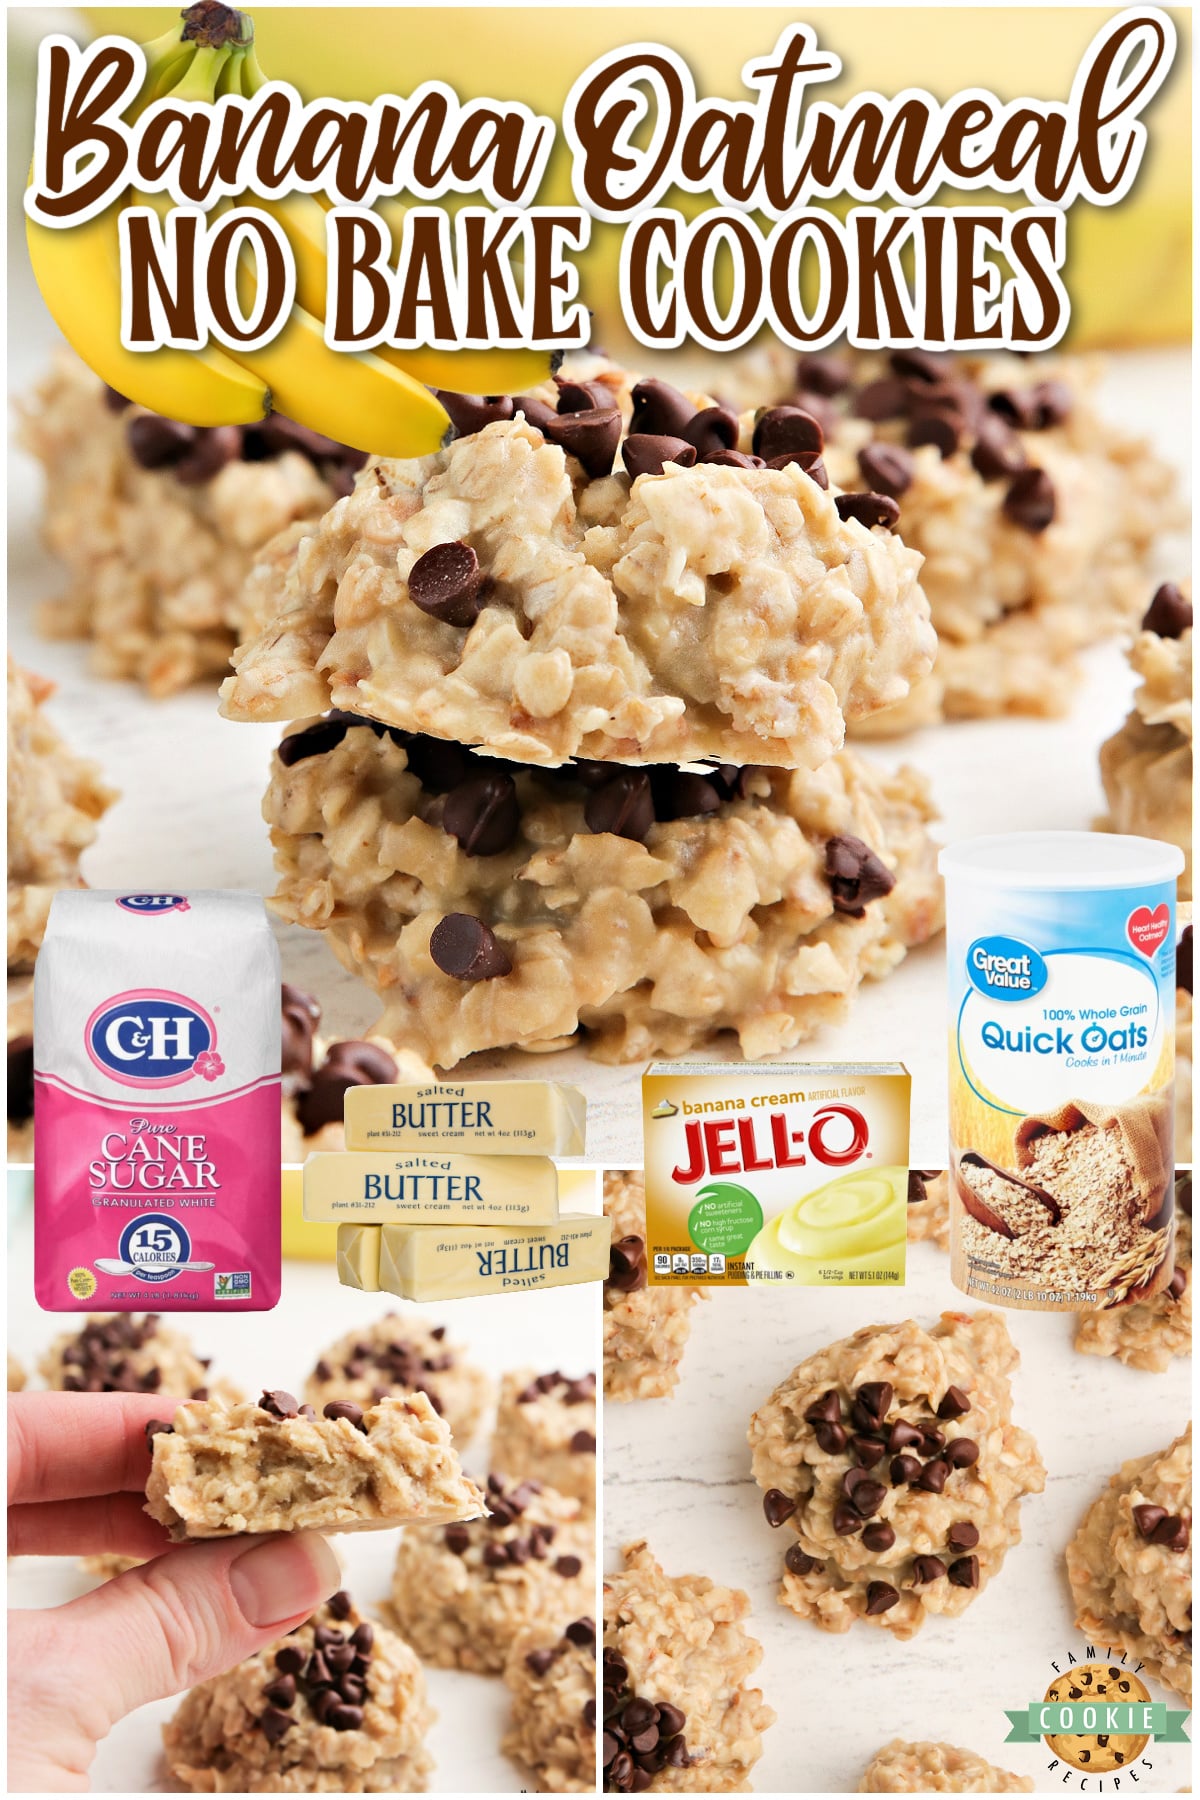 Banana Oatmeal No Bake Cookies are simple oatmeal cookies made with just a few ingredients. Delicious no bake cookie recipe packed with banana flavor!